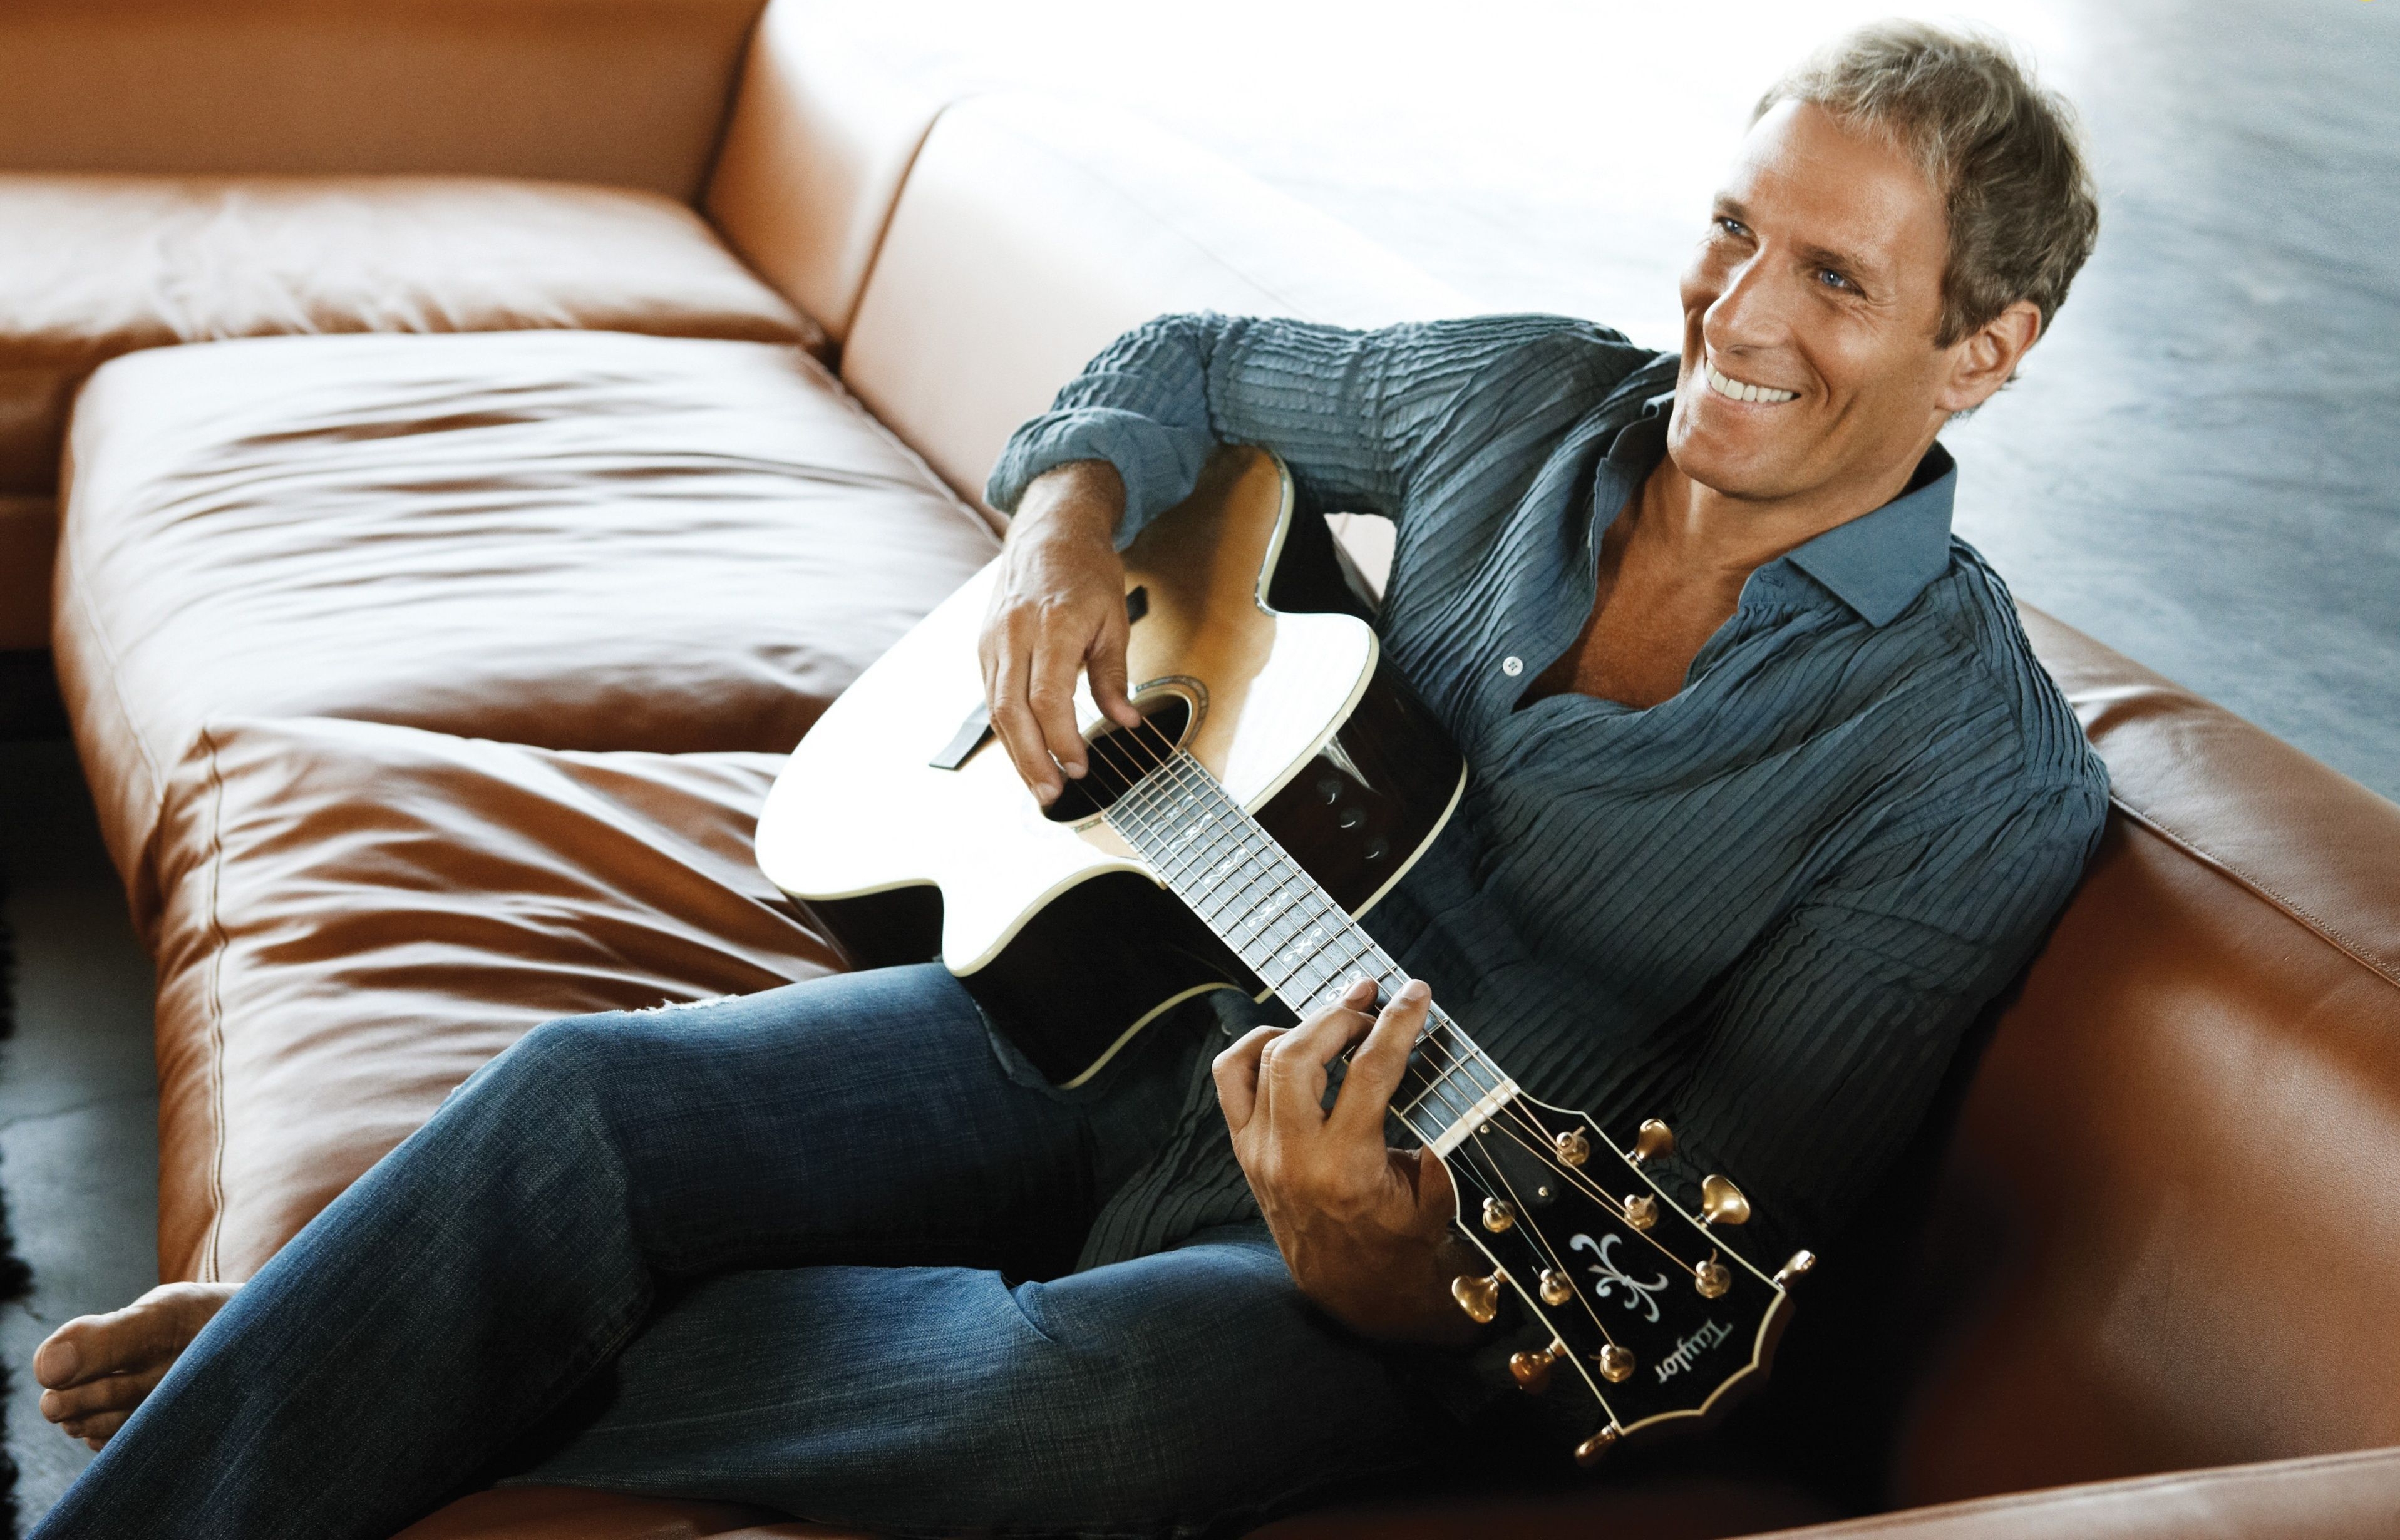 Michael Bolton Wallpapers Image Photos Pictures Backgrounds.